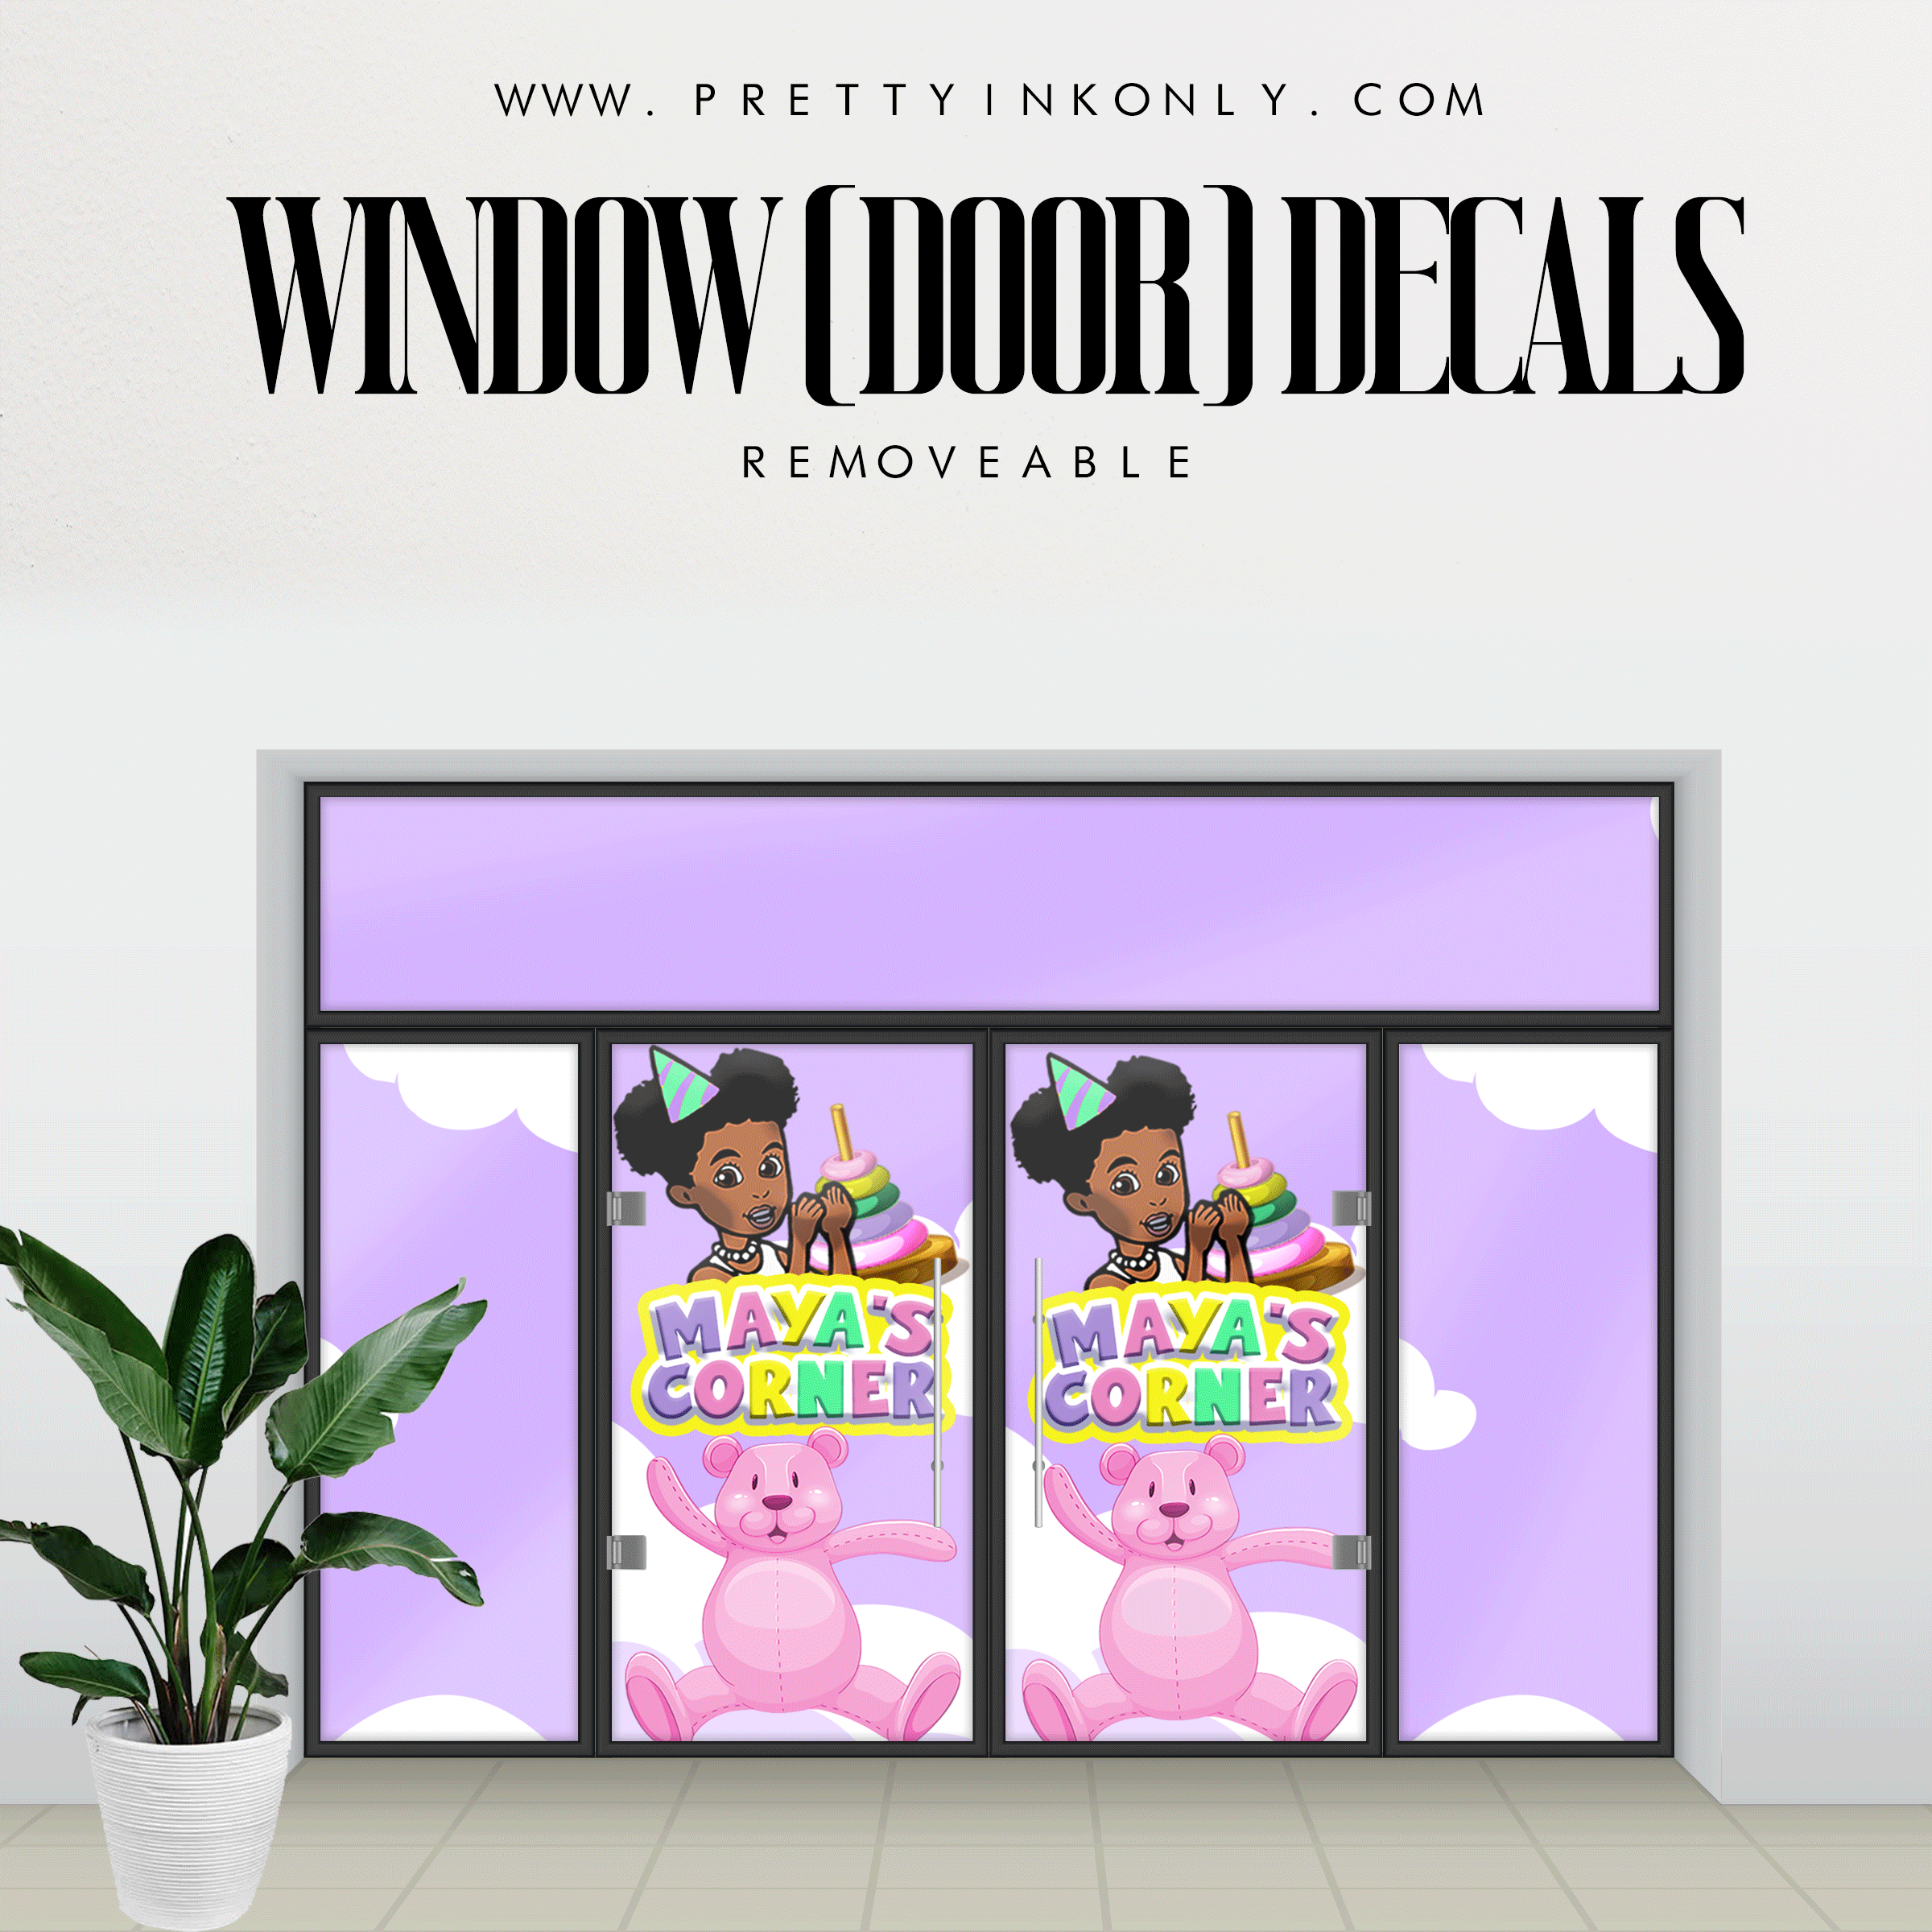 STOREFRONT/DOOR  Decal || Ready to Print